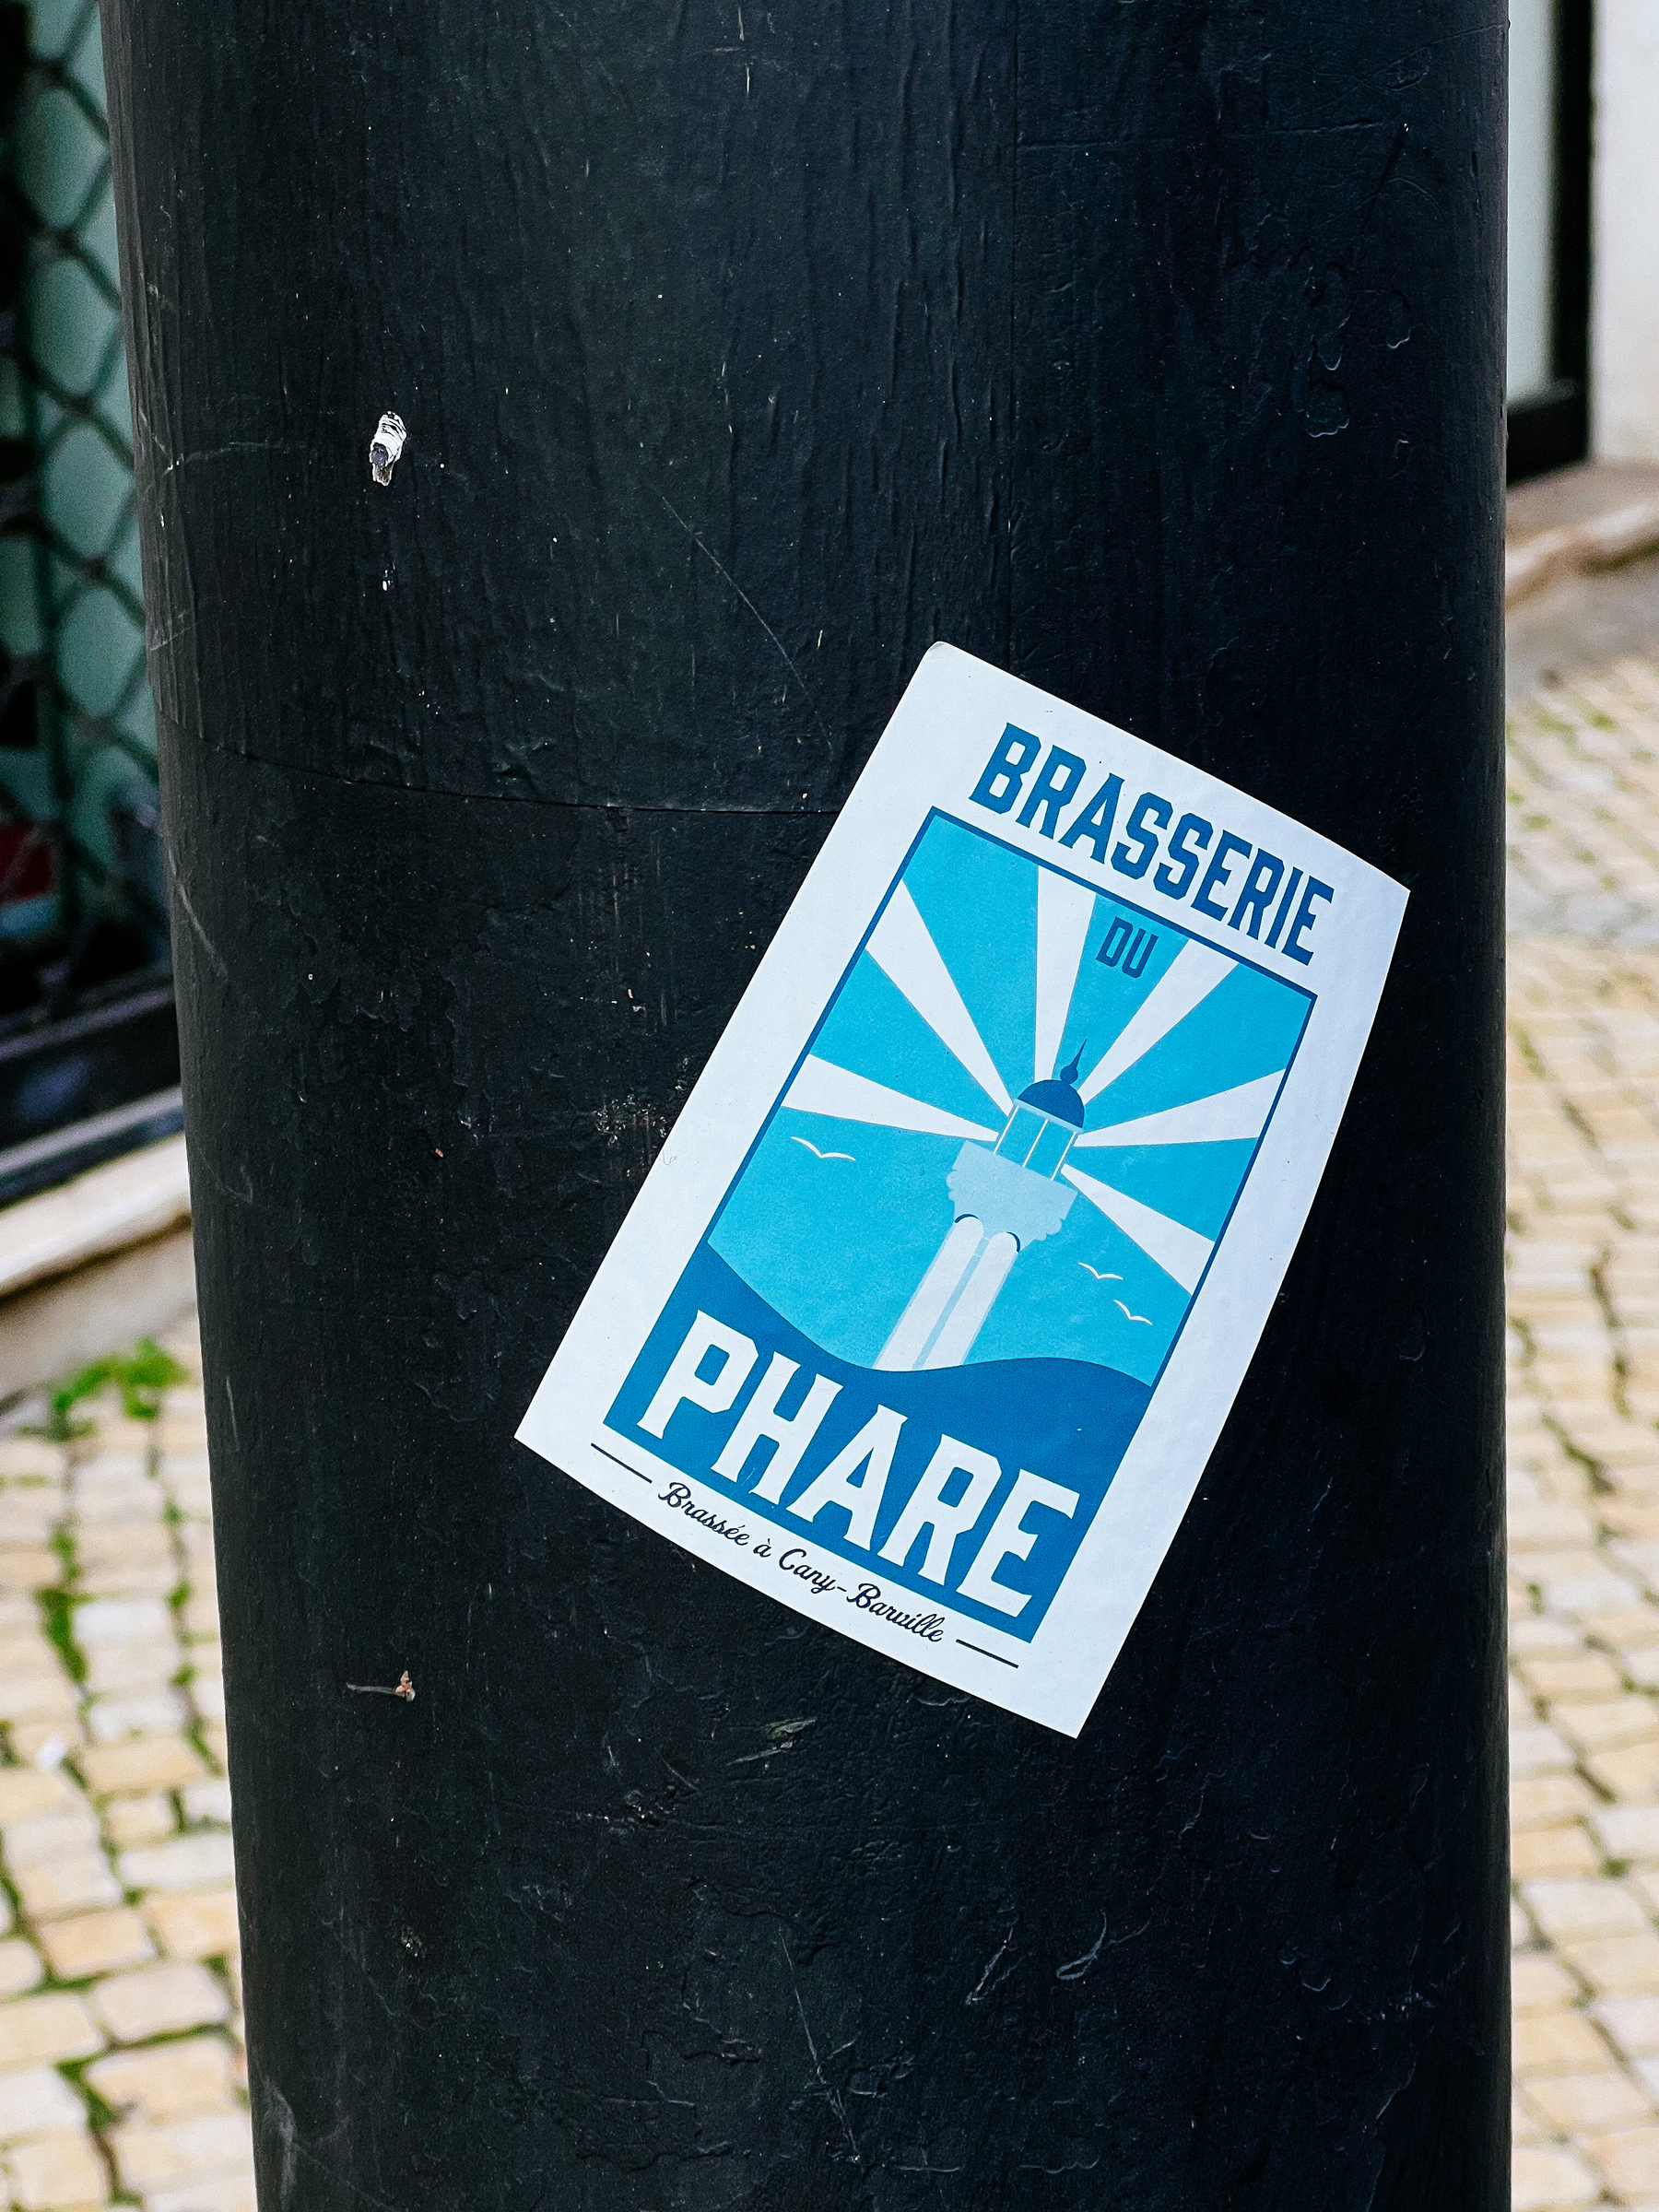 Sticker for “Brasserie du Phare”, all in blue, with a lighthouse. 